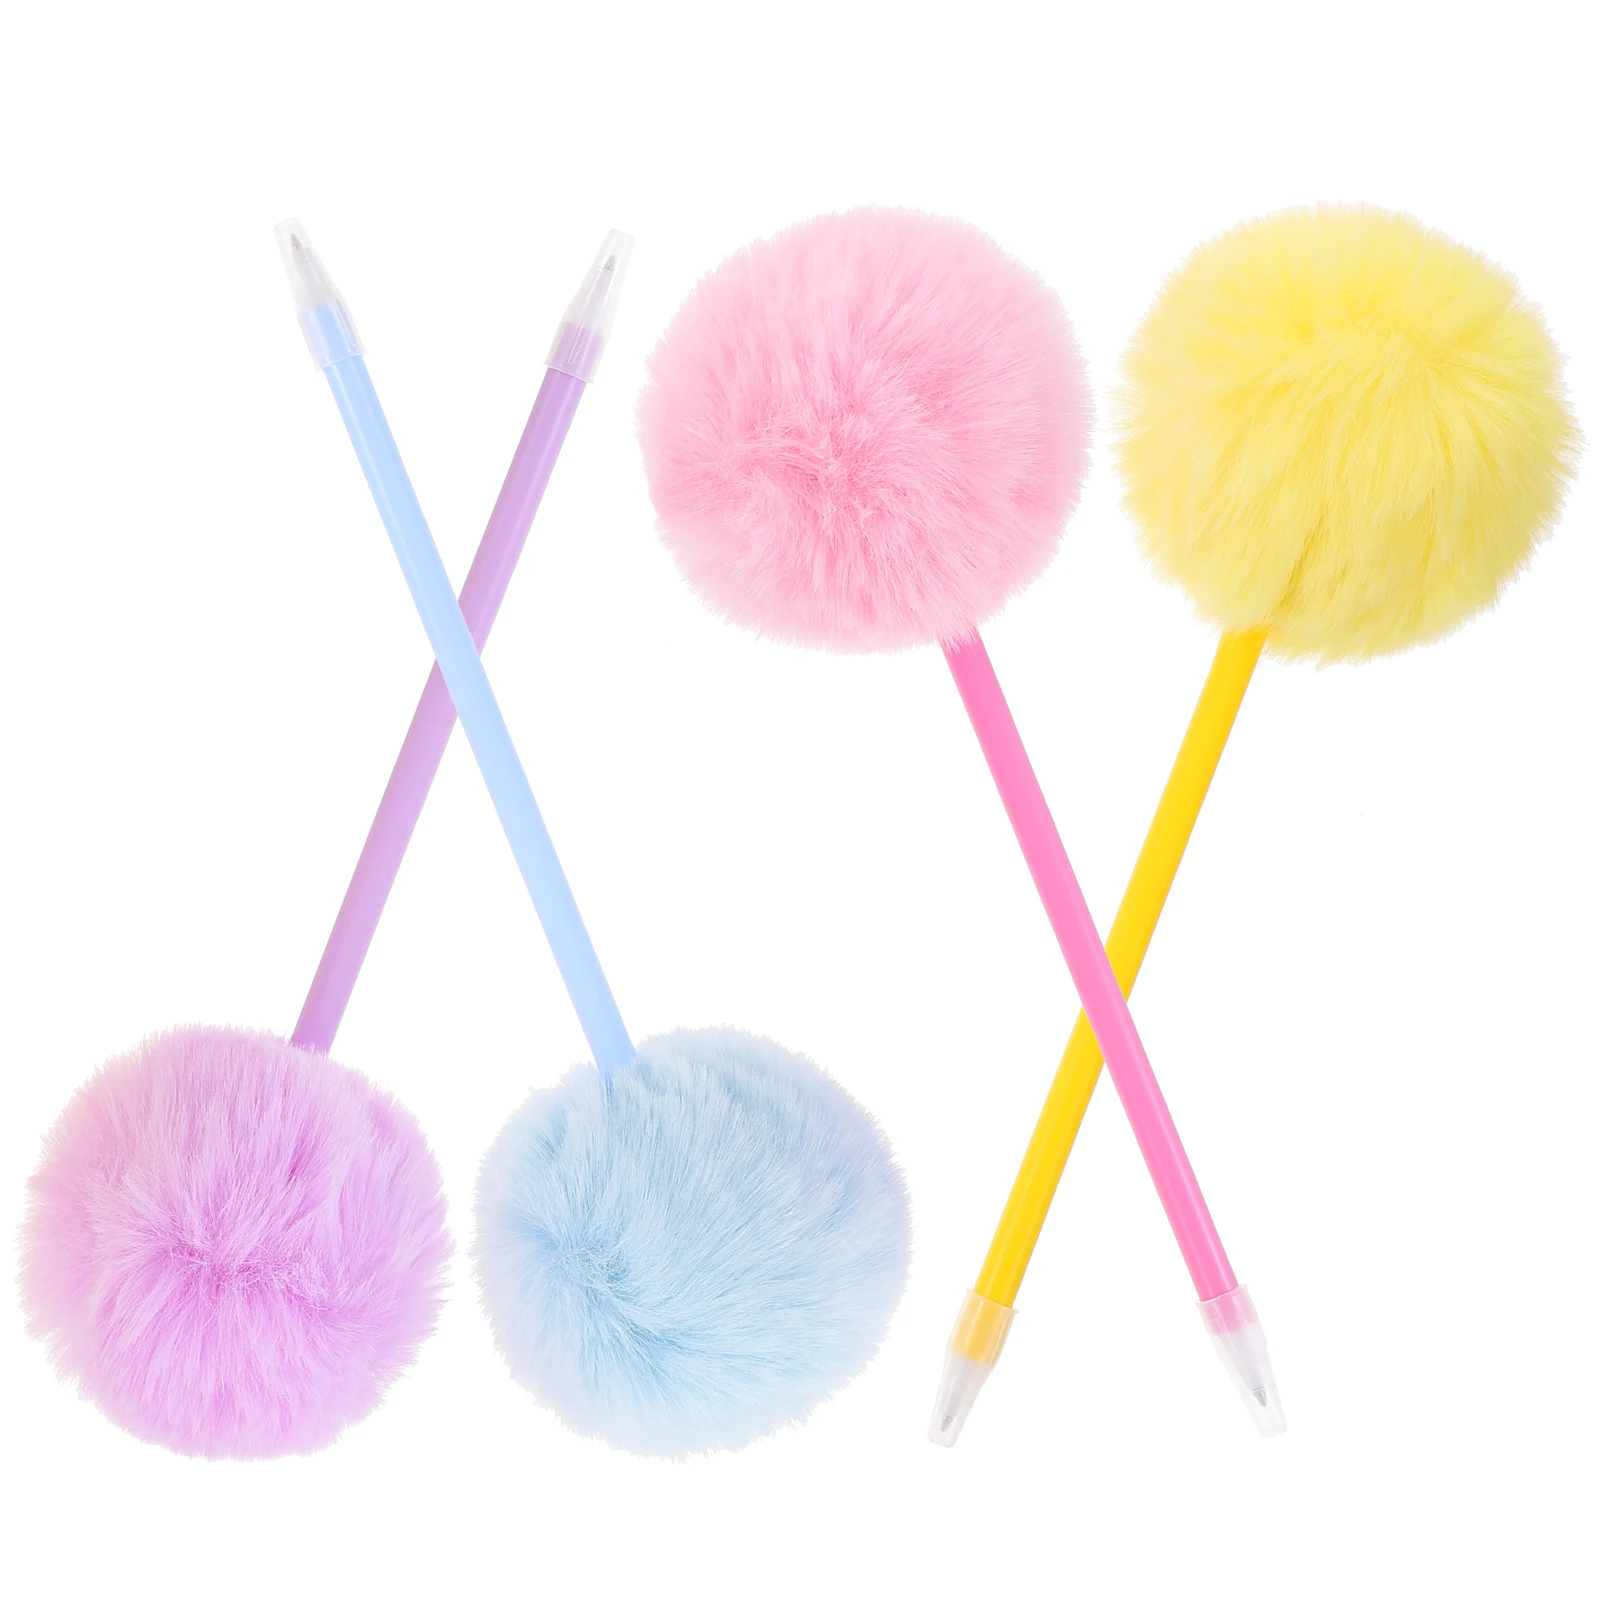 4 Pcs Hair Ball Writing Pen Ballpoint Pens Pompom Fluffy Cute Lovely for Cartoon Cute Pp Decorative Student Girls chinese calligraphy brushes pen woolen hair chinese painting brush regular script calligraphy writing brush hook line fine brush